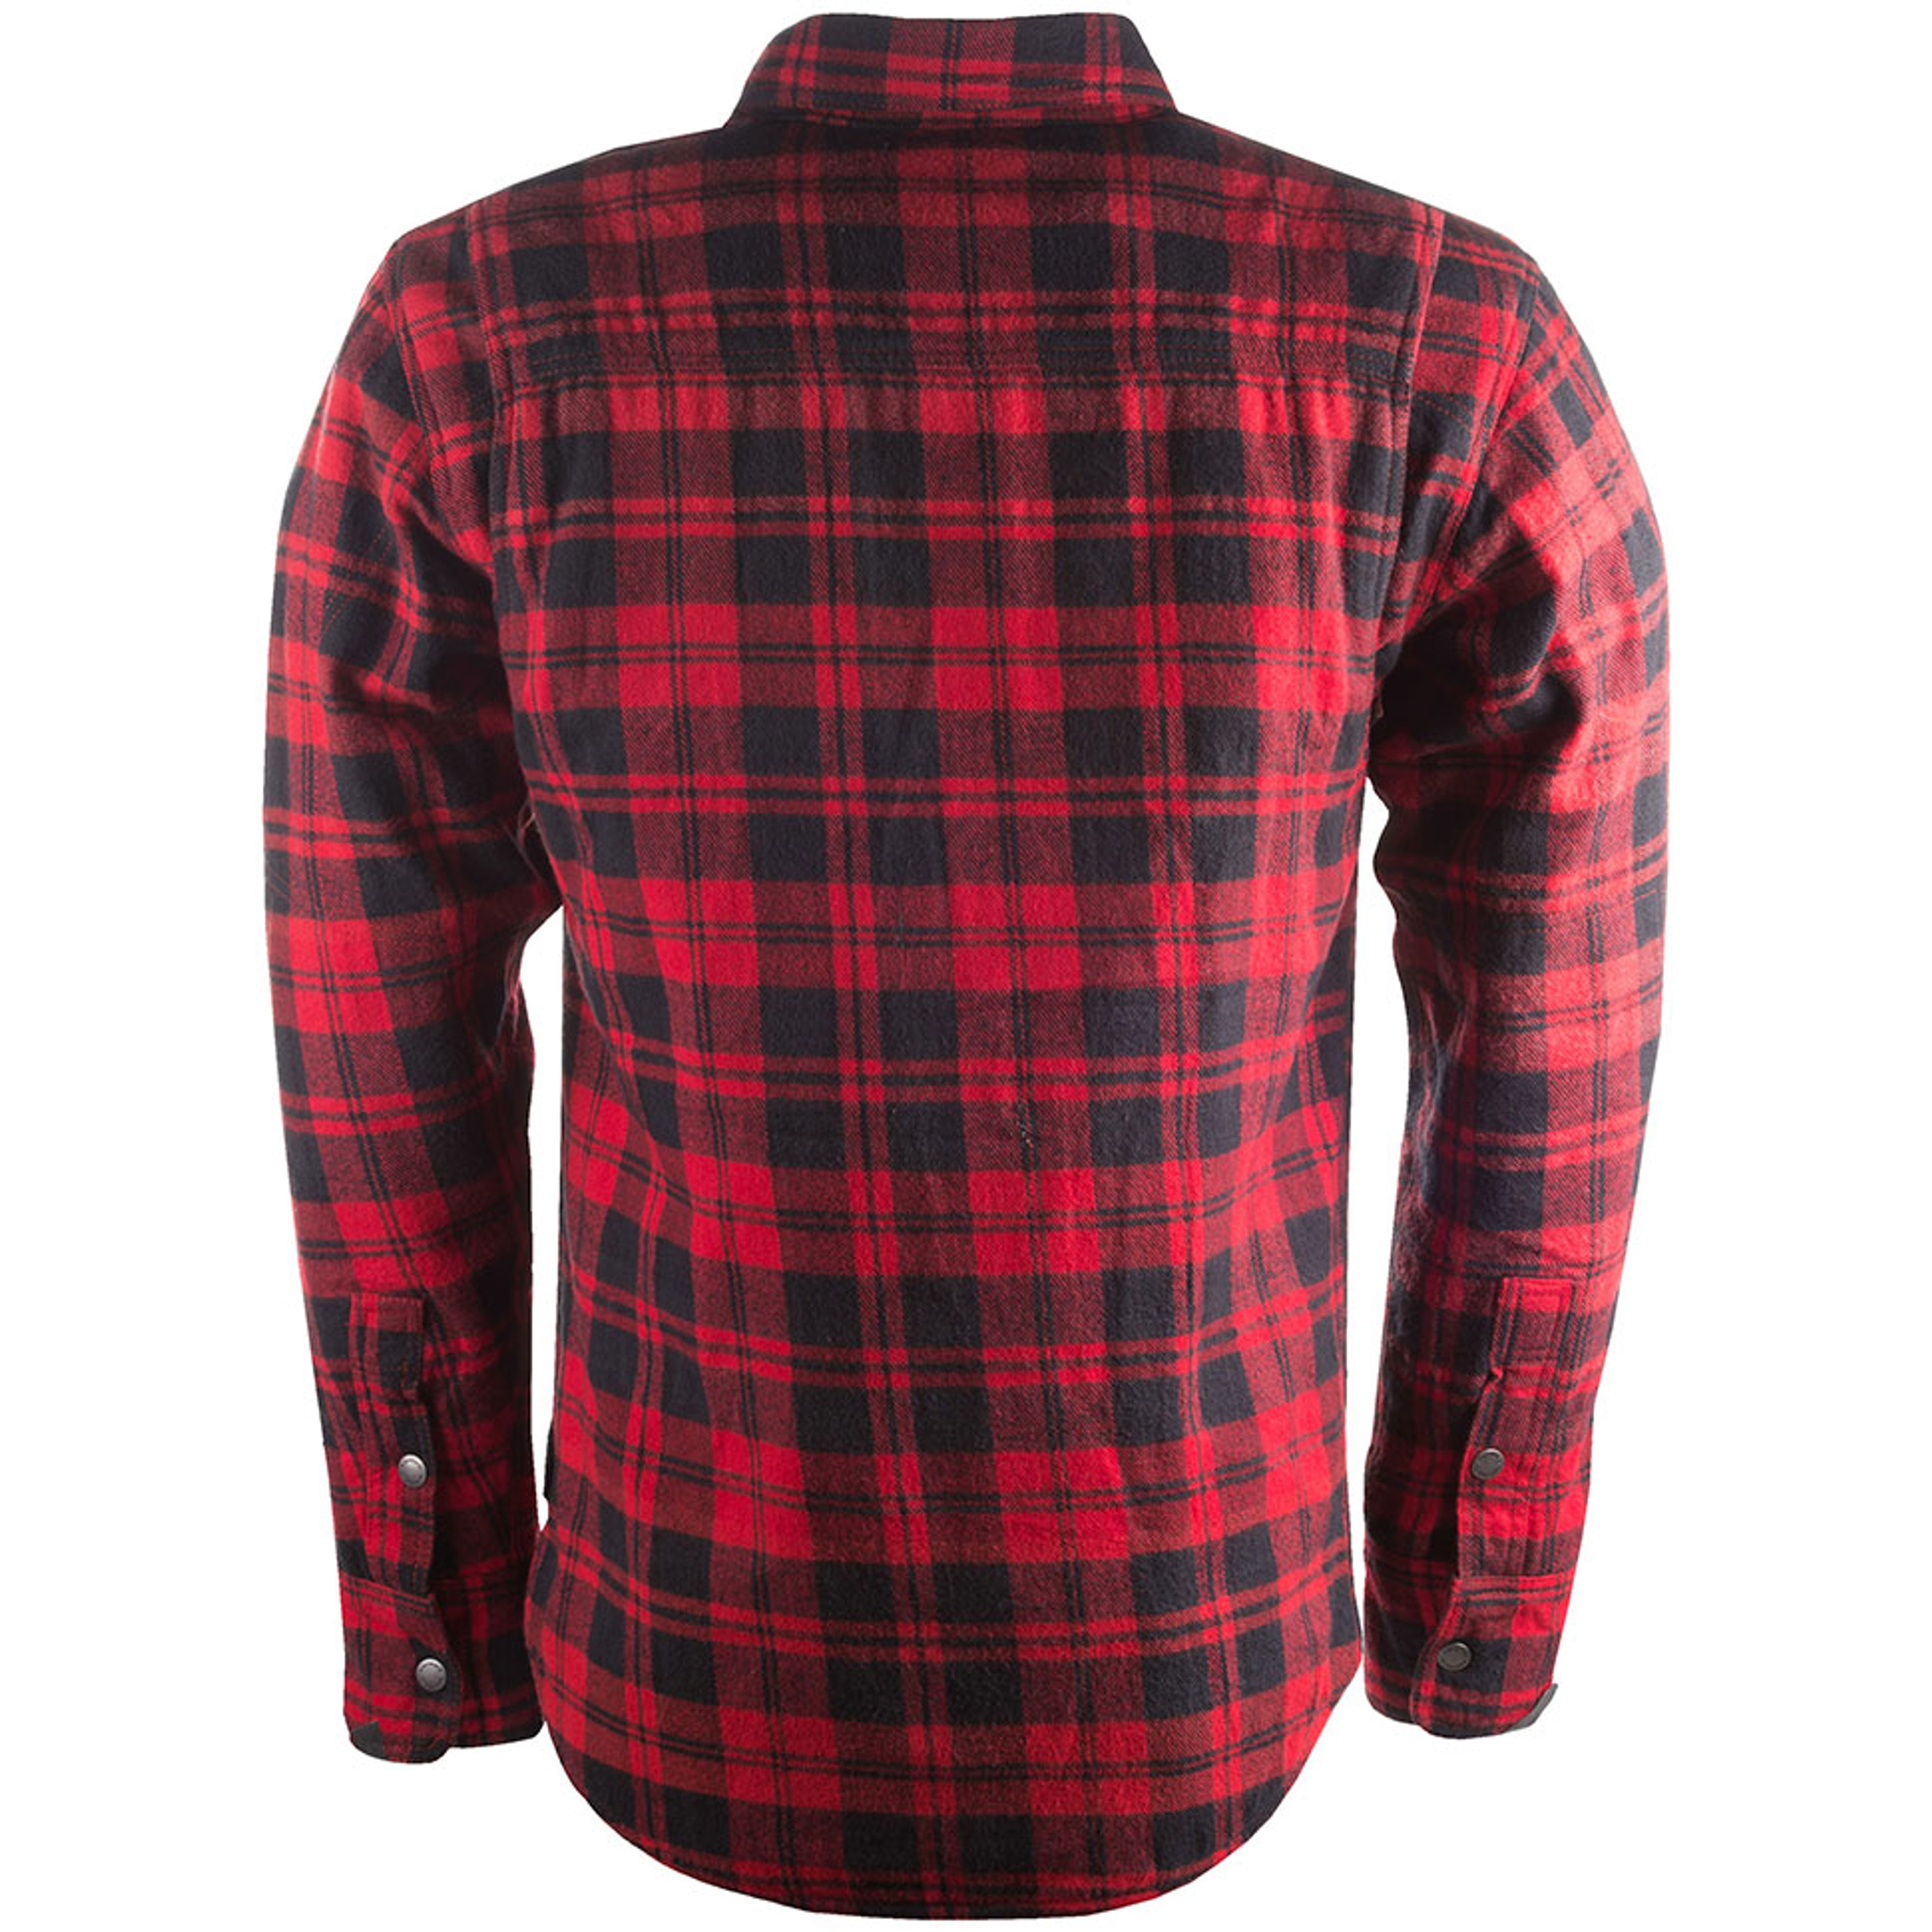 Motorcycle Flannels - Get Lowered Cycles